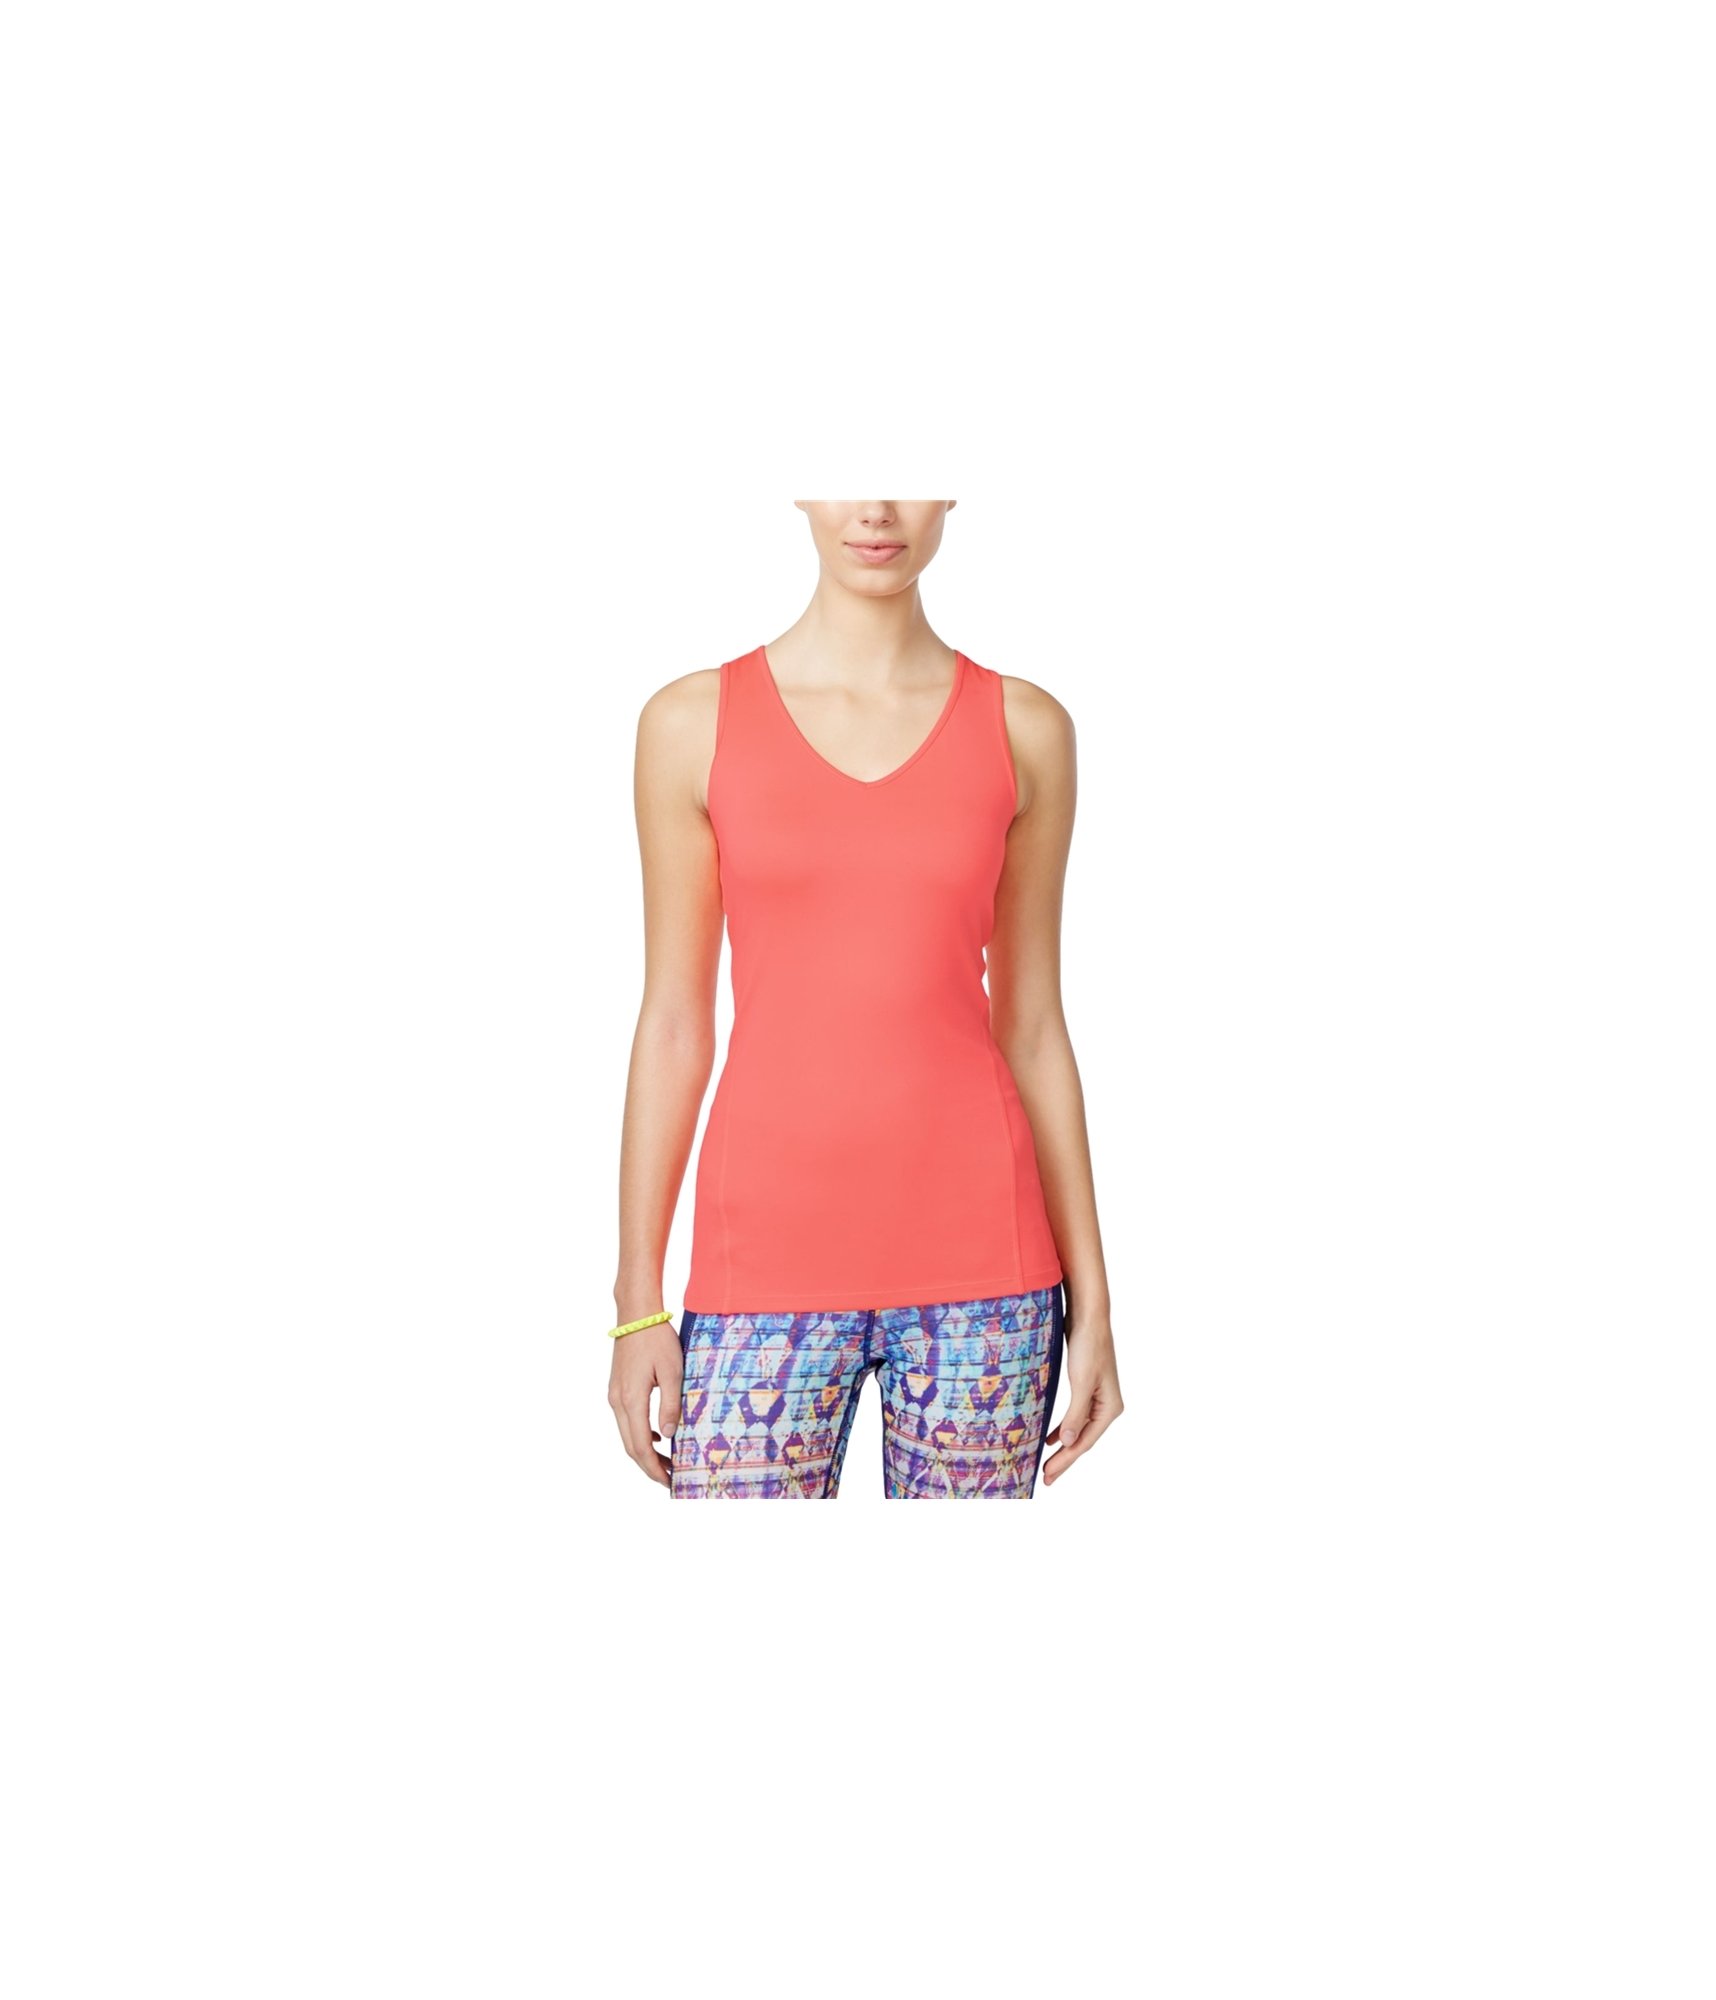 Buy a Jessica Simpson Womens The Warmup Compression Tank Top, TW2